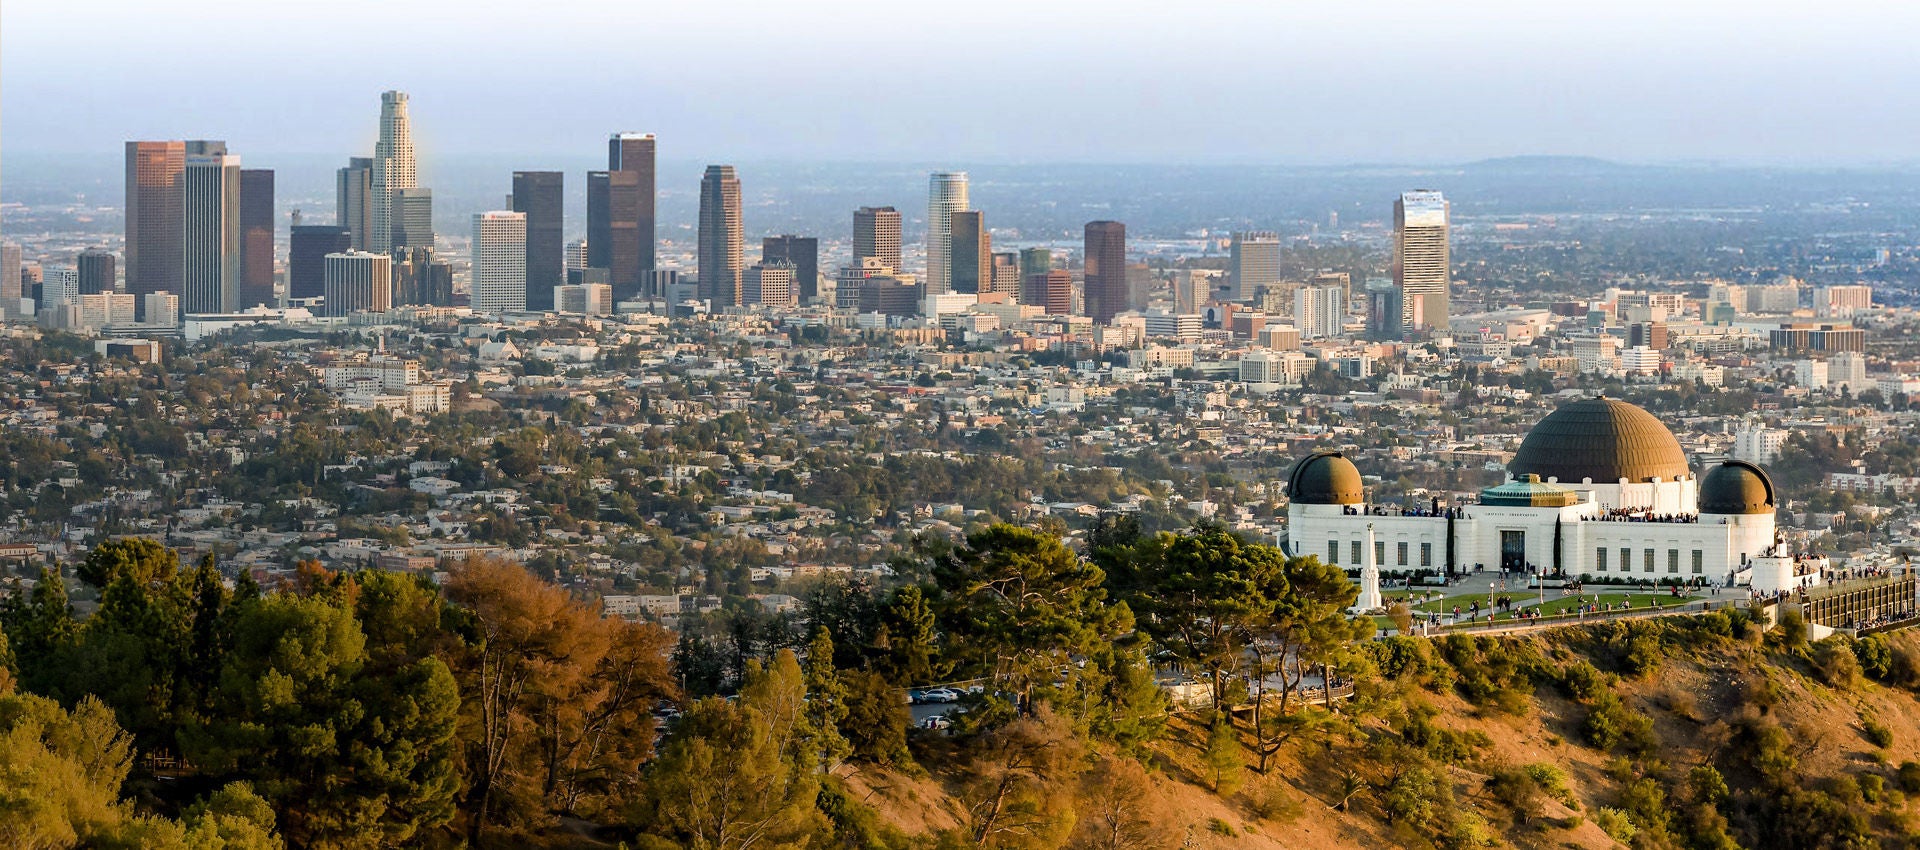 The Griffith Observatory sits in front of the Los Angeles skyline and city below the hill.